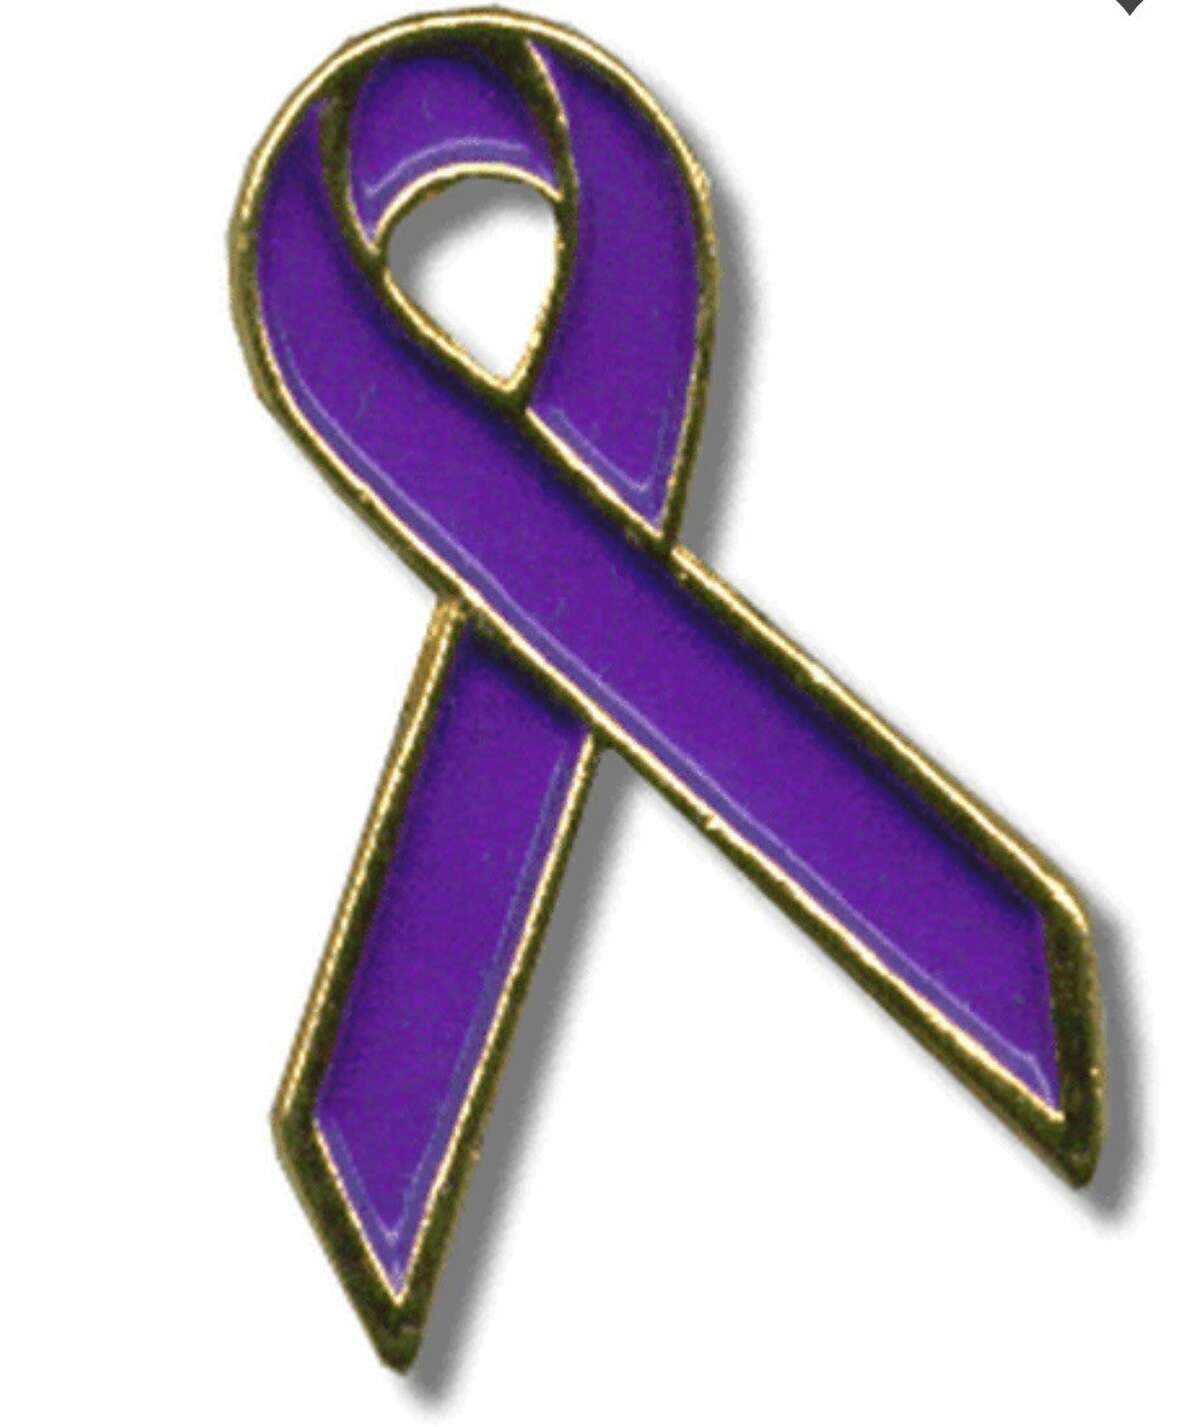 The purple pin in the Purple Pin Project represents epilepsy awareness and Mackenzie Allen's memory and advocacy.  